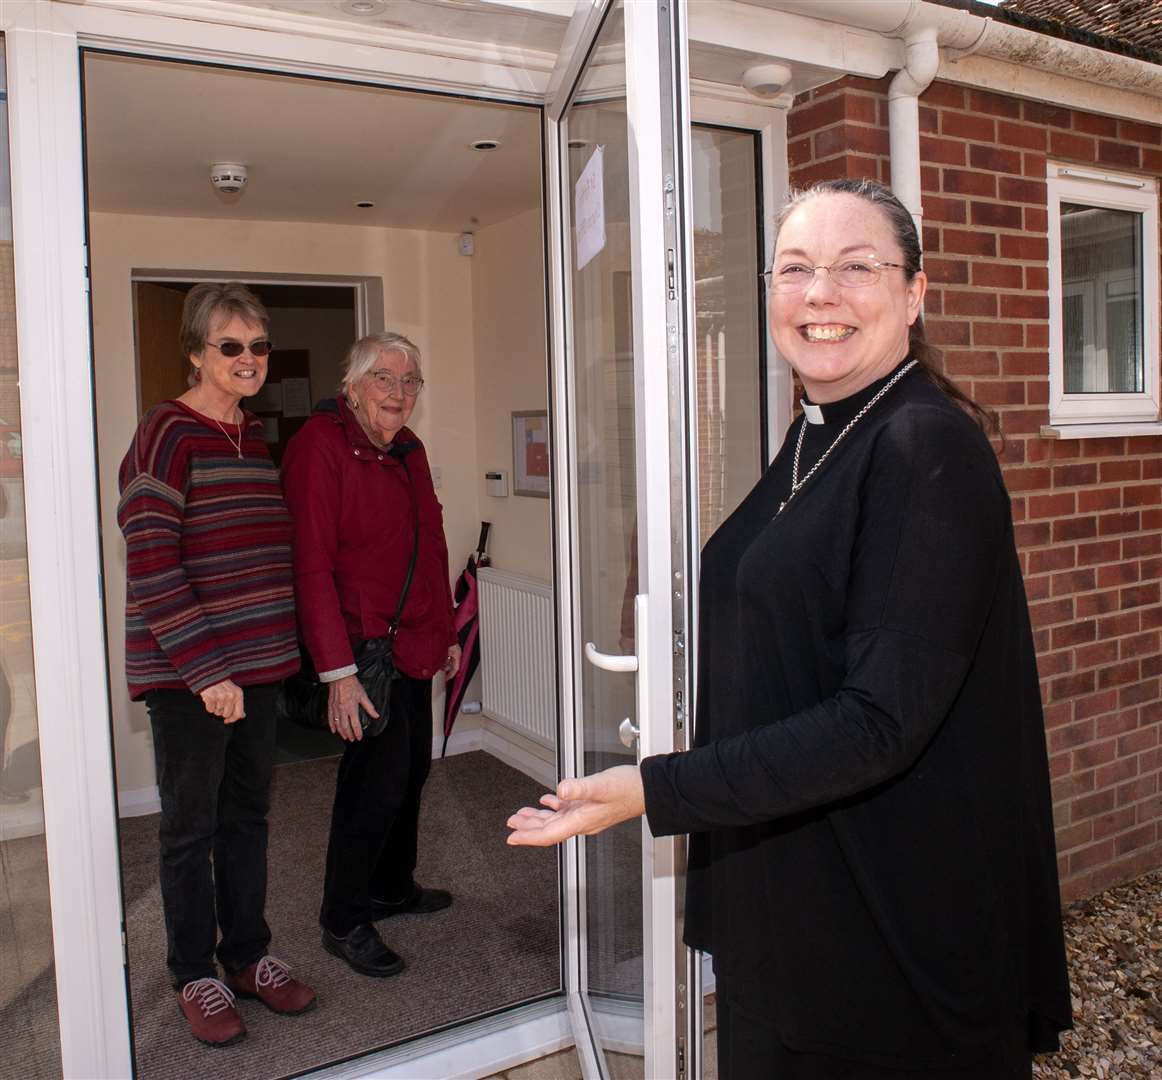 A new community hub has opened! Pictured: Rev Kyla Sorense with Joyce Stevens (left) and Gill Hiles (middle)